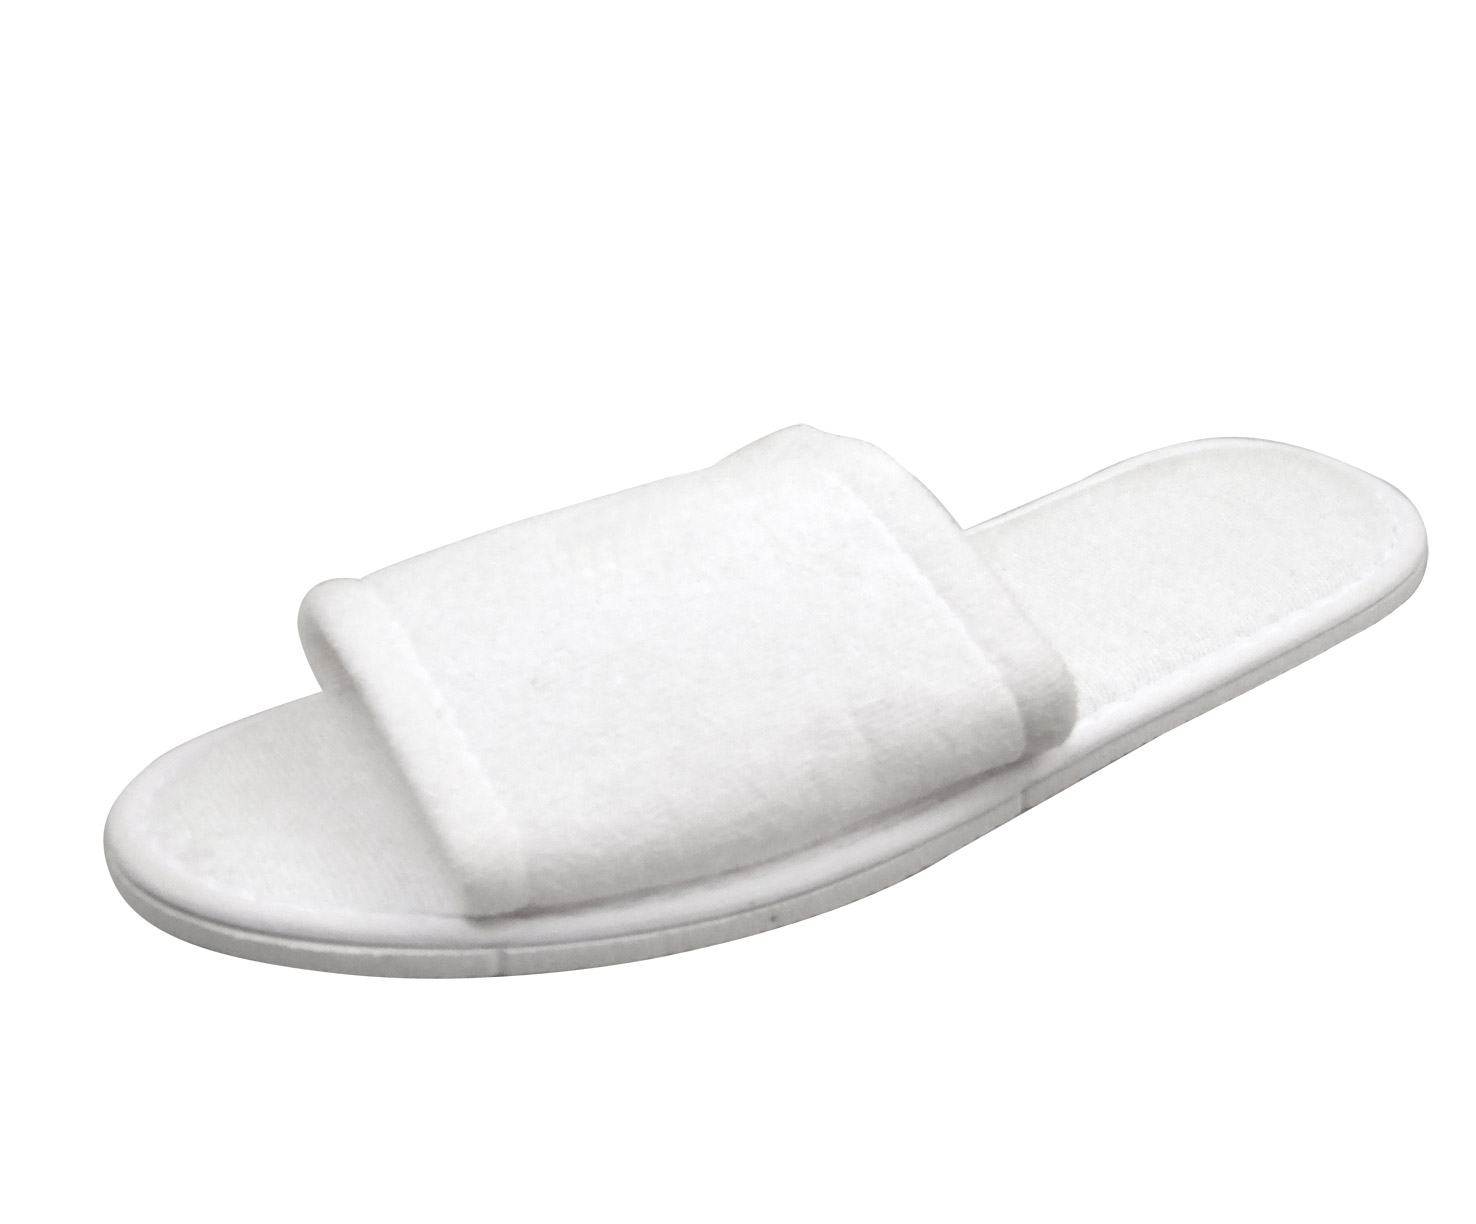 Beige Blanket Slippers Closed Toe (Small)